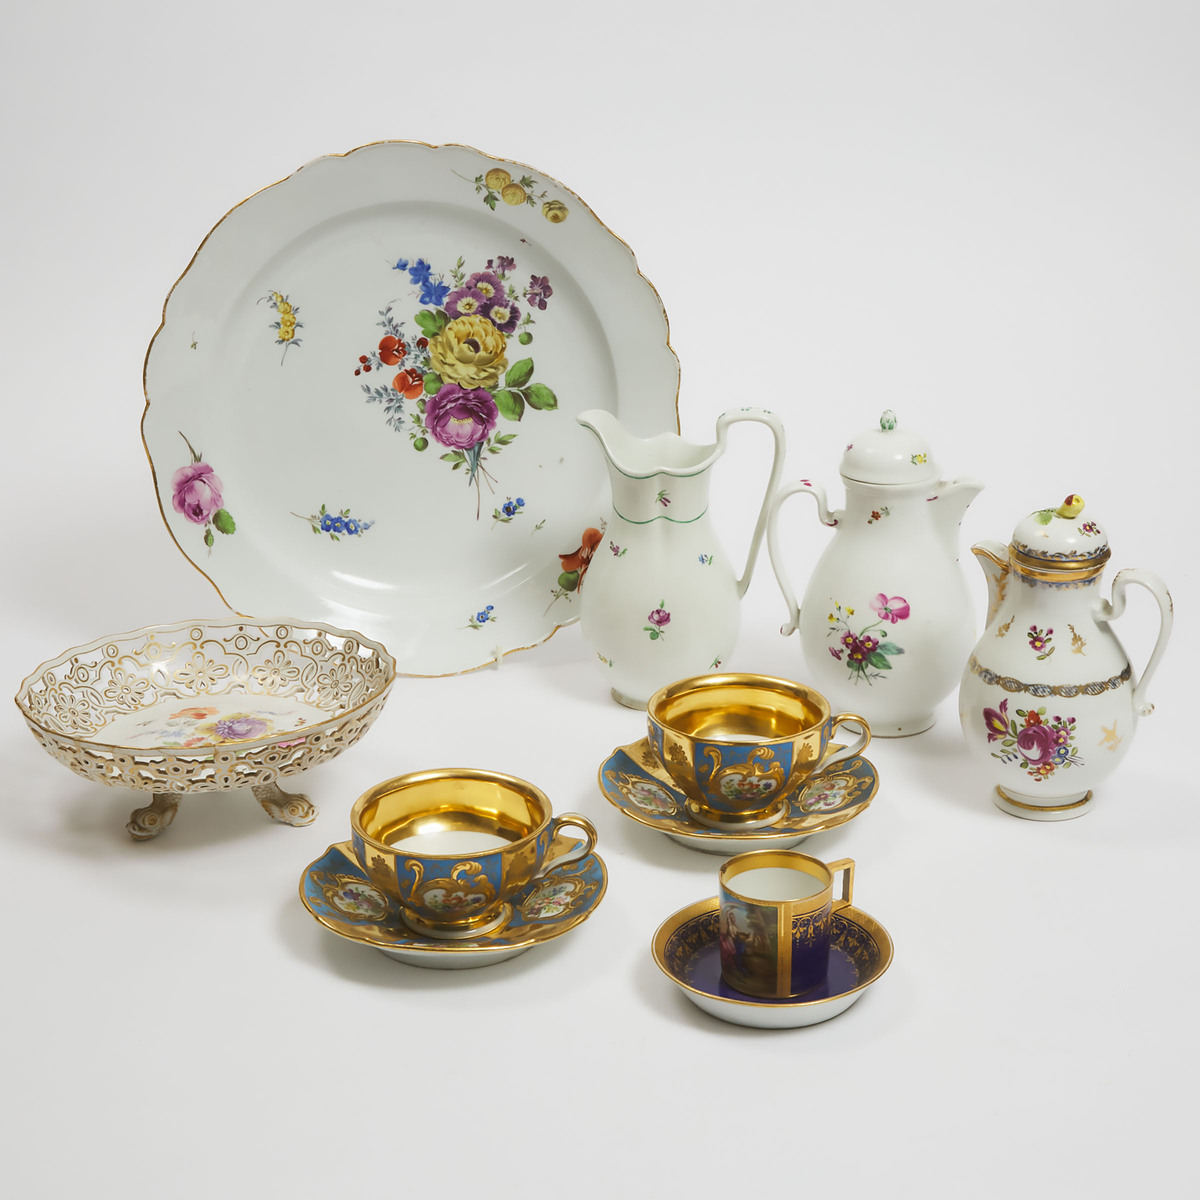 Group of Meissen and Vienna Porcelain, late 18th/19th century, charger diameter 15 in — 38 cm (11 Pi